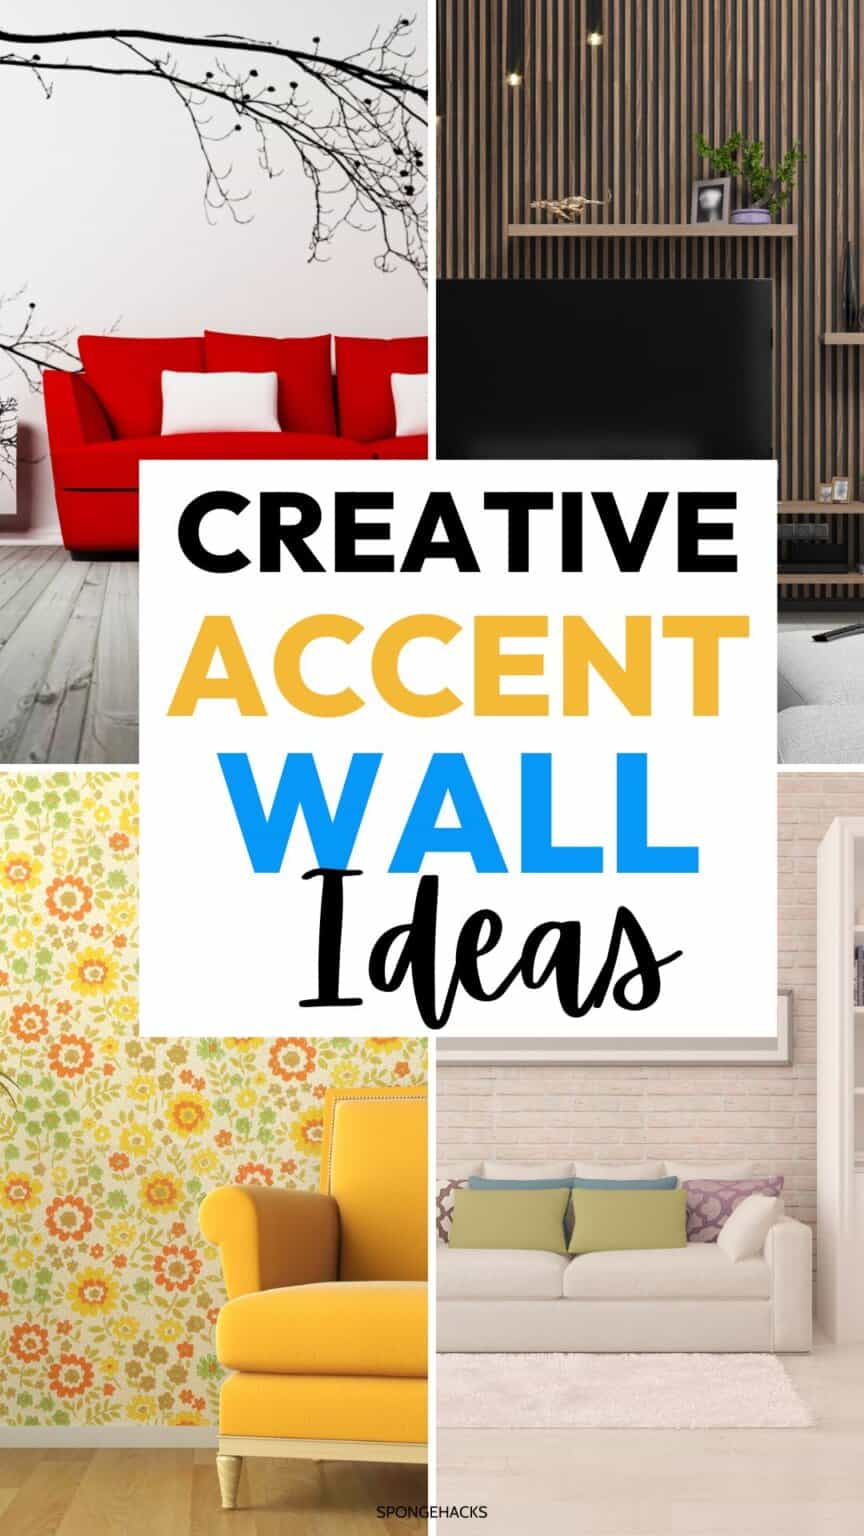 16 Ingenious Accent Wall Ideas That Will Instantly Inspire Your Inner ...